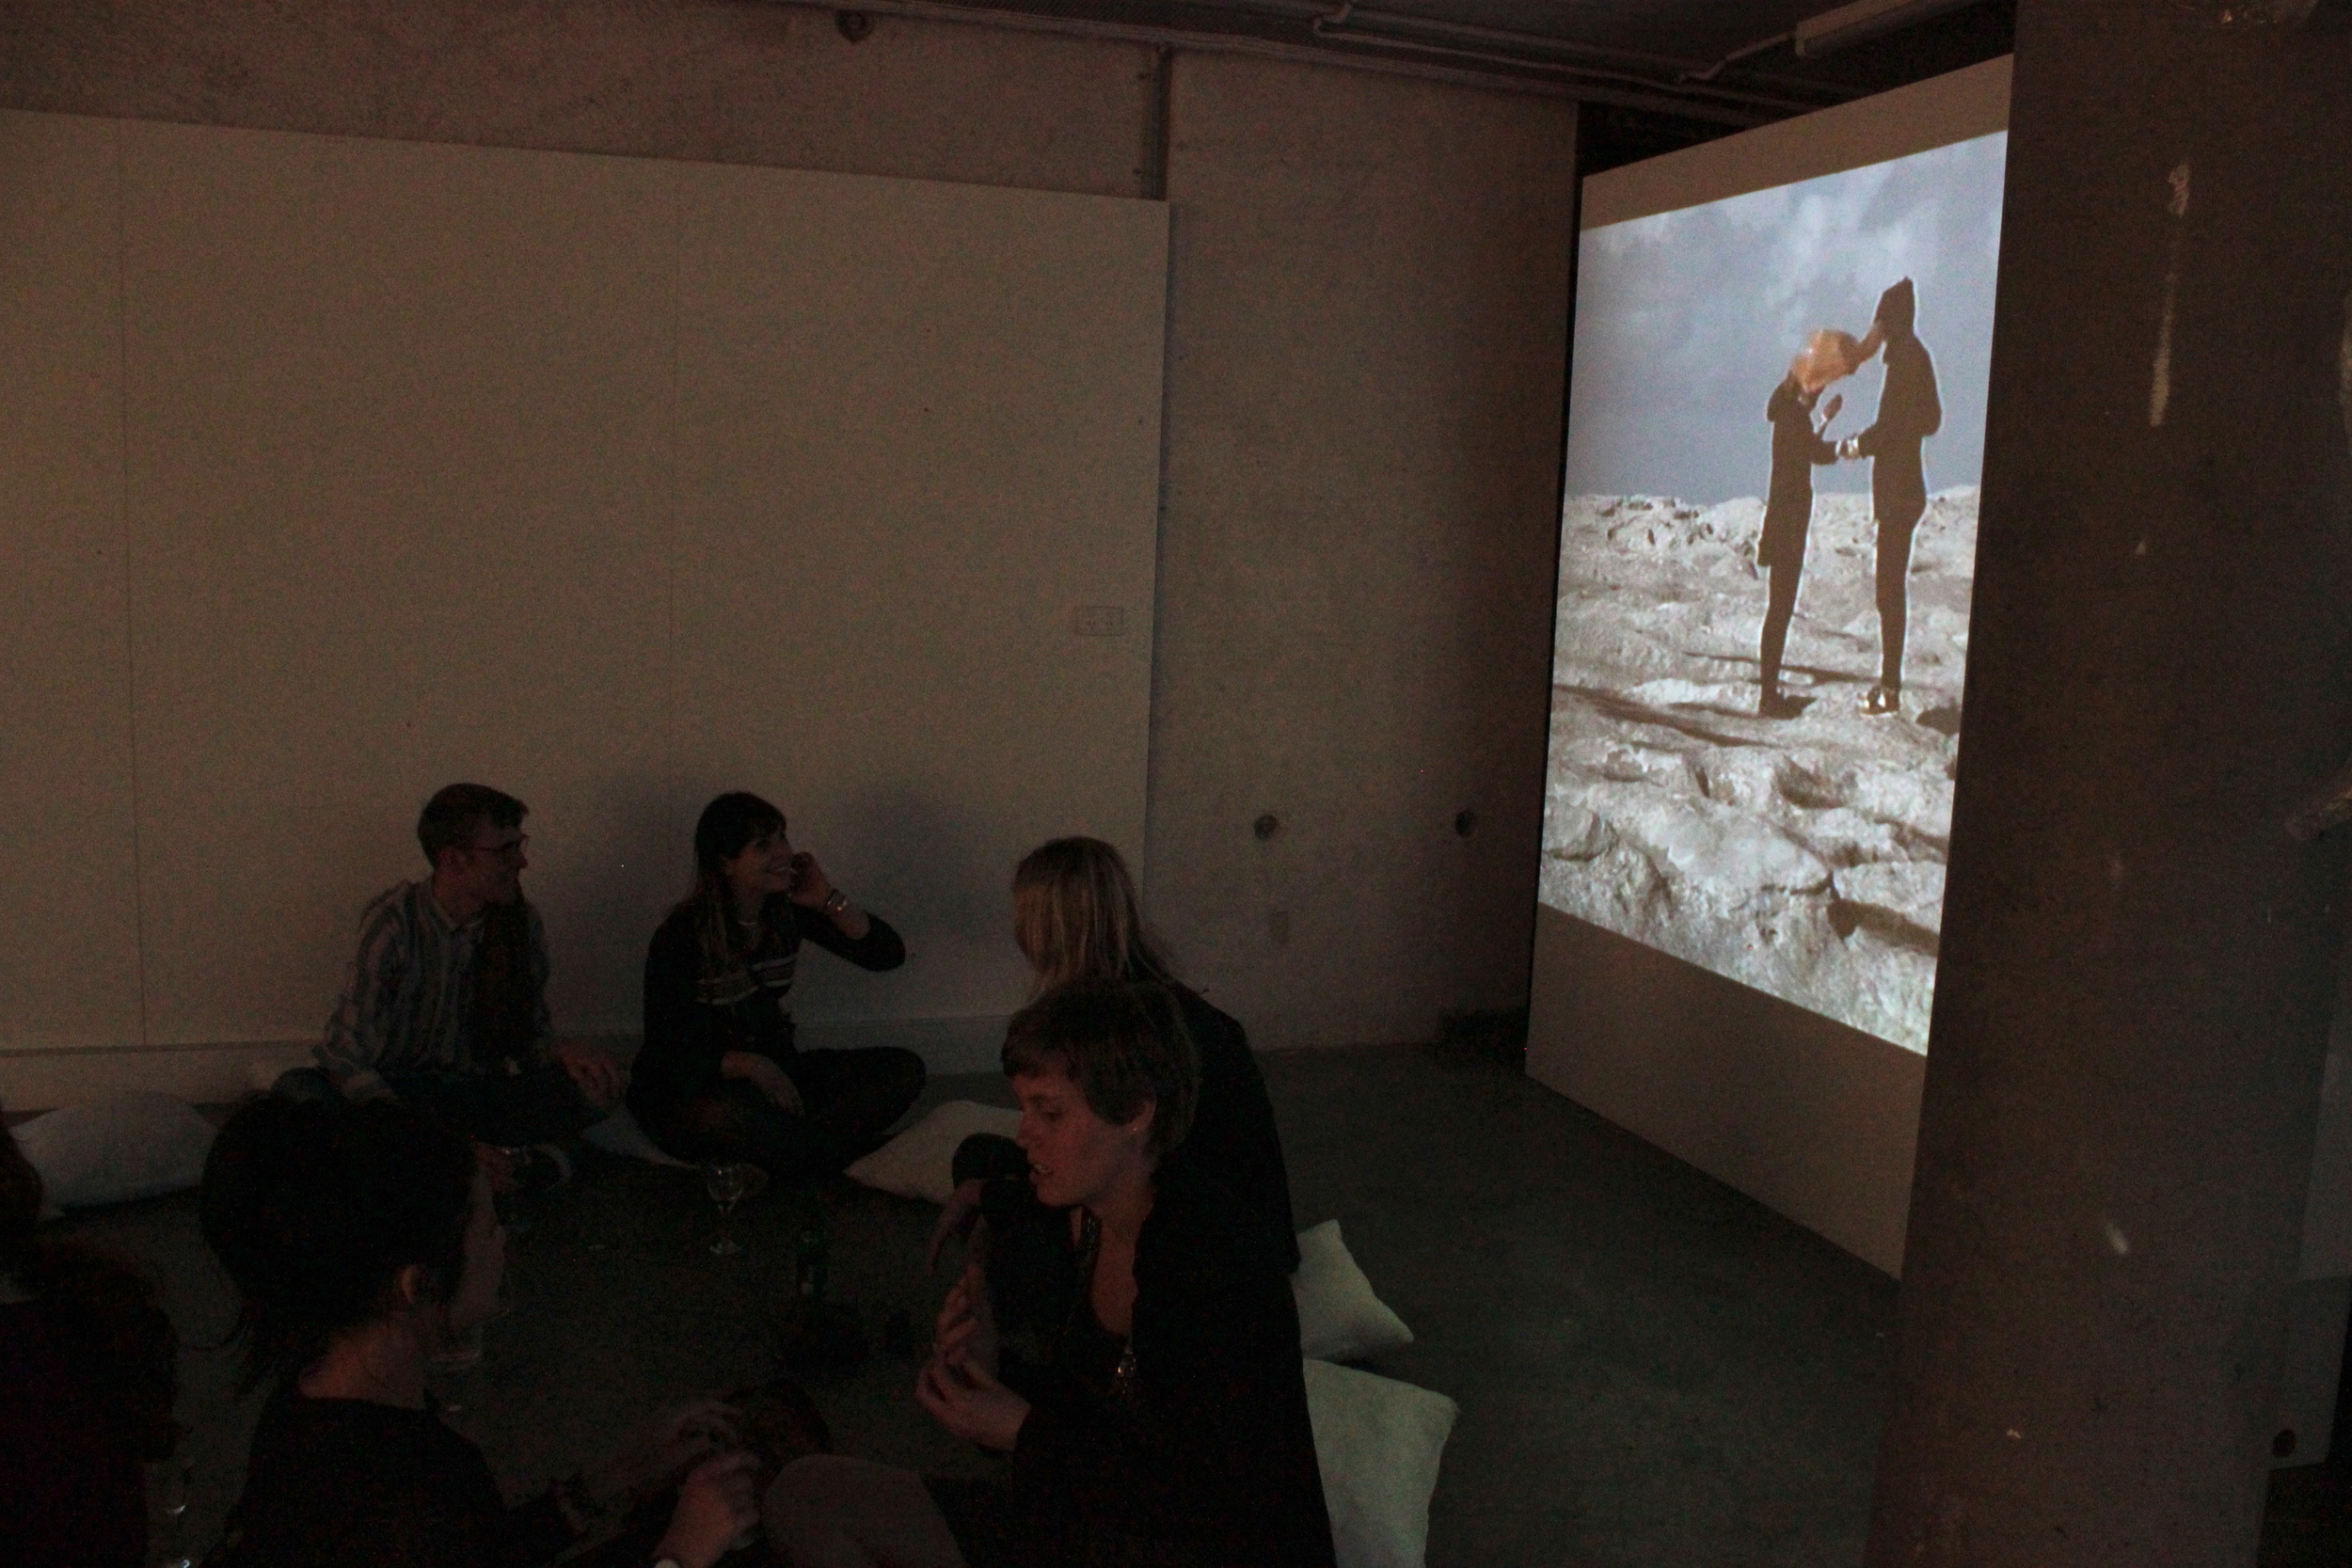  Annie &amp; Halle, 2013 (still)  Collaborative performance with Luke O'Donnell  Video installation  